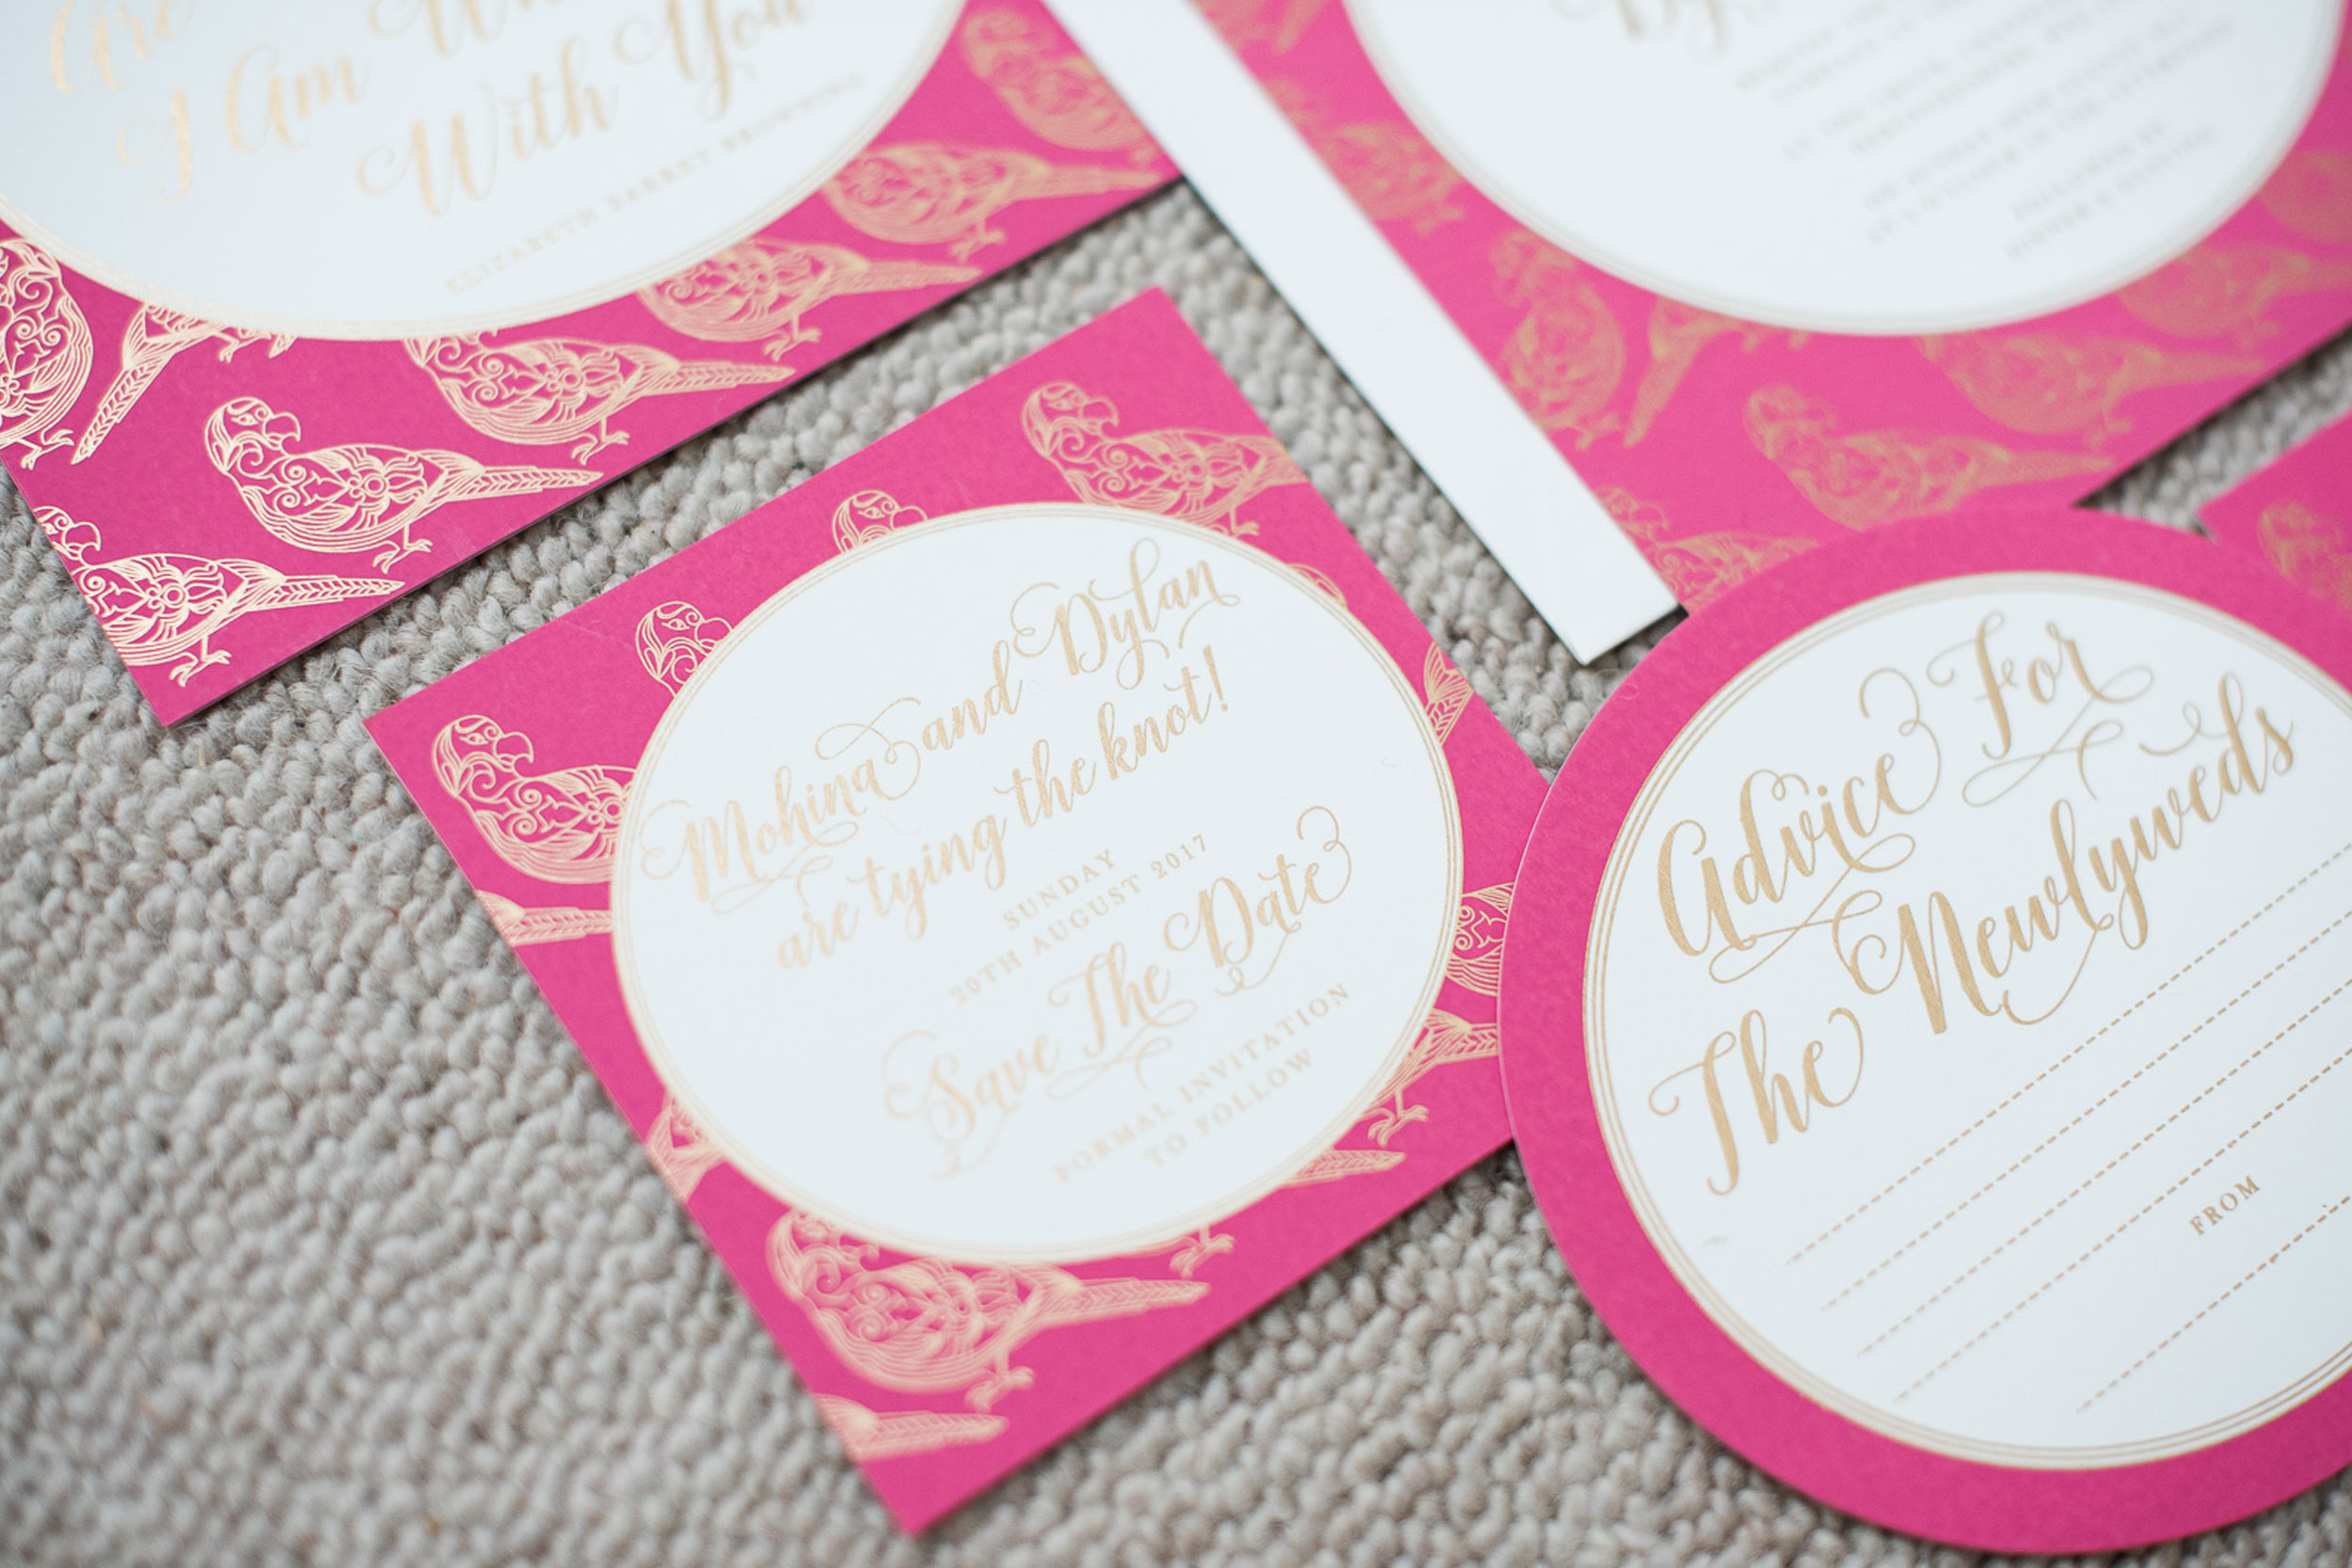 trio-of-life-pink-parrot-save-the-date-and-advice-card-wedding-invitation.jpg